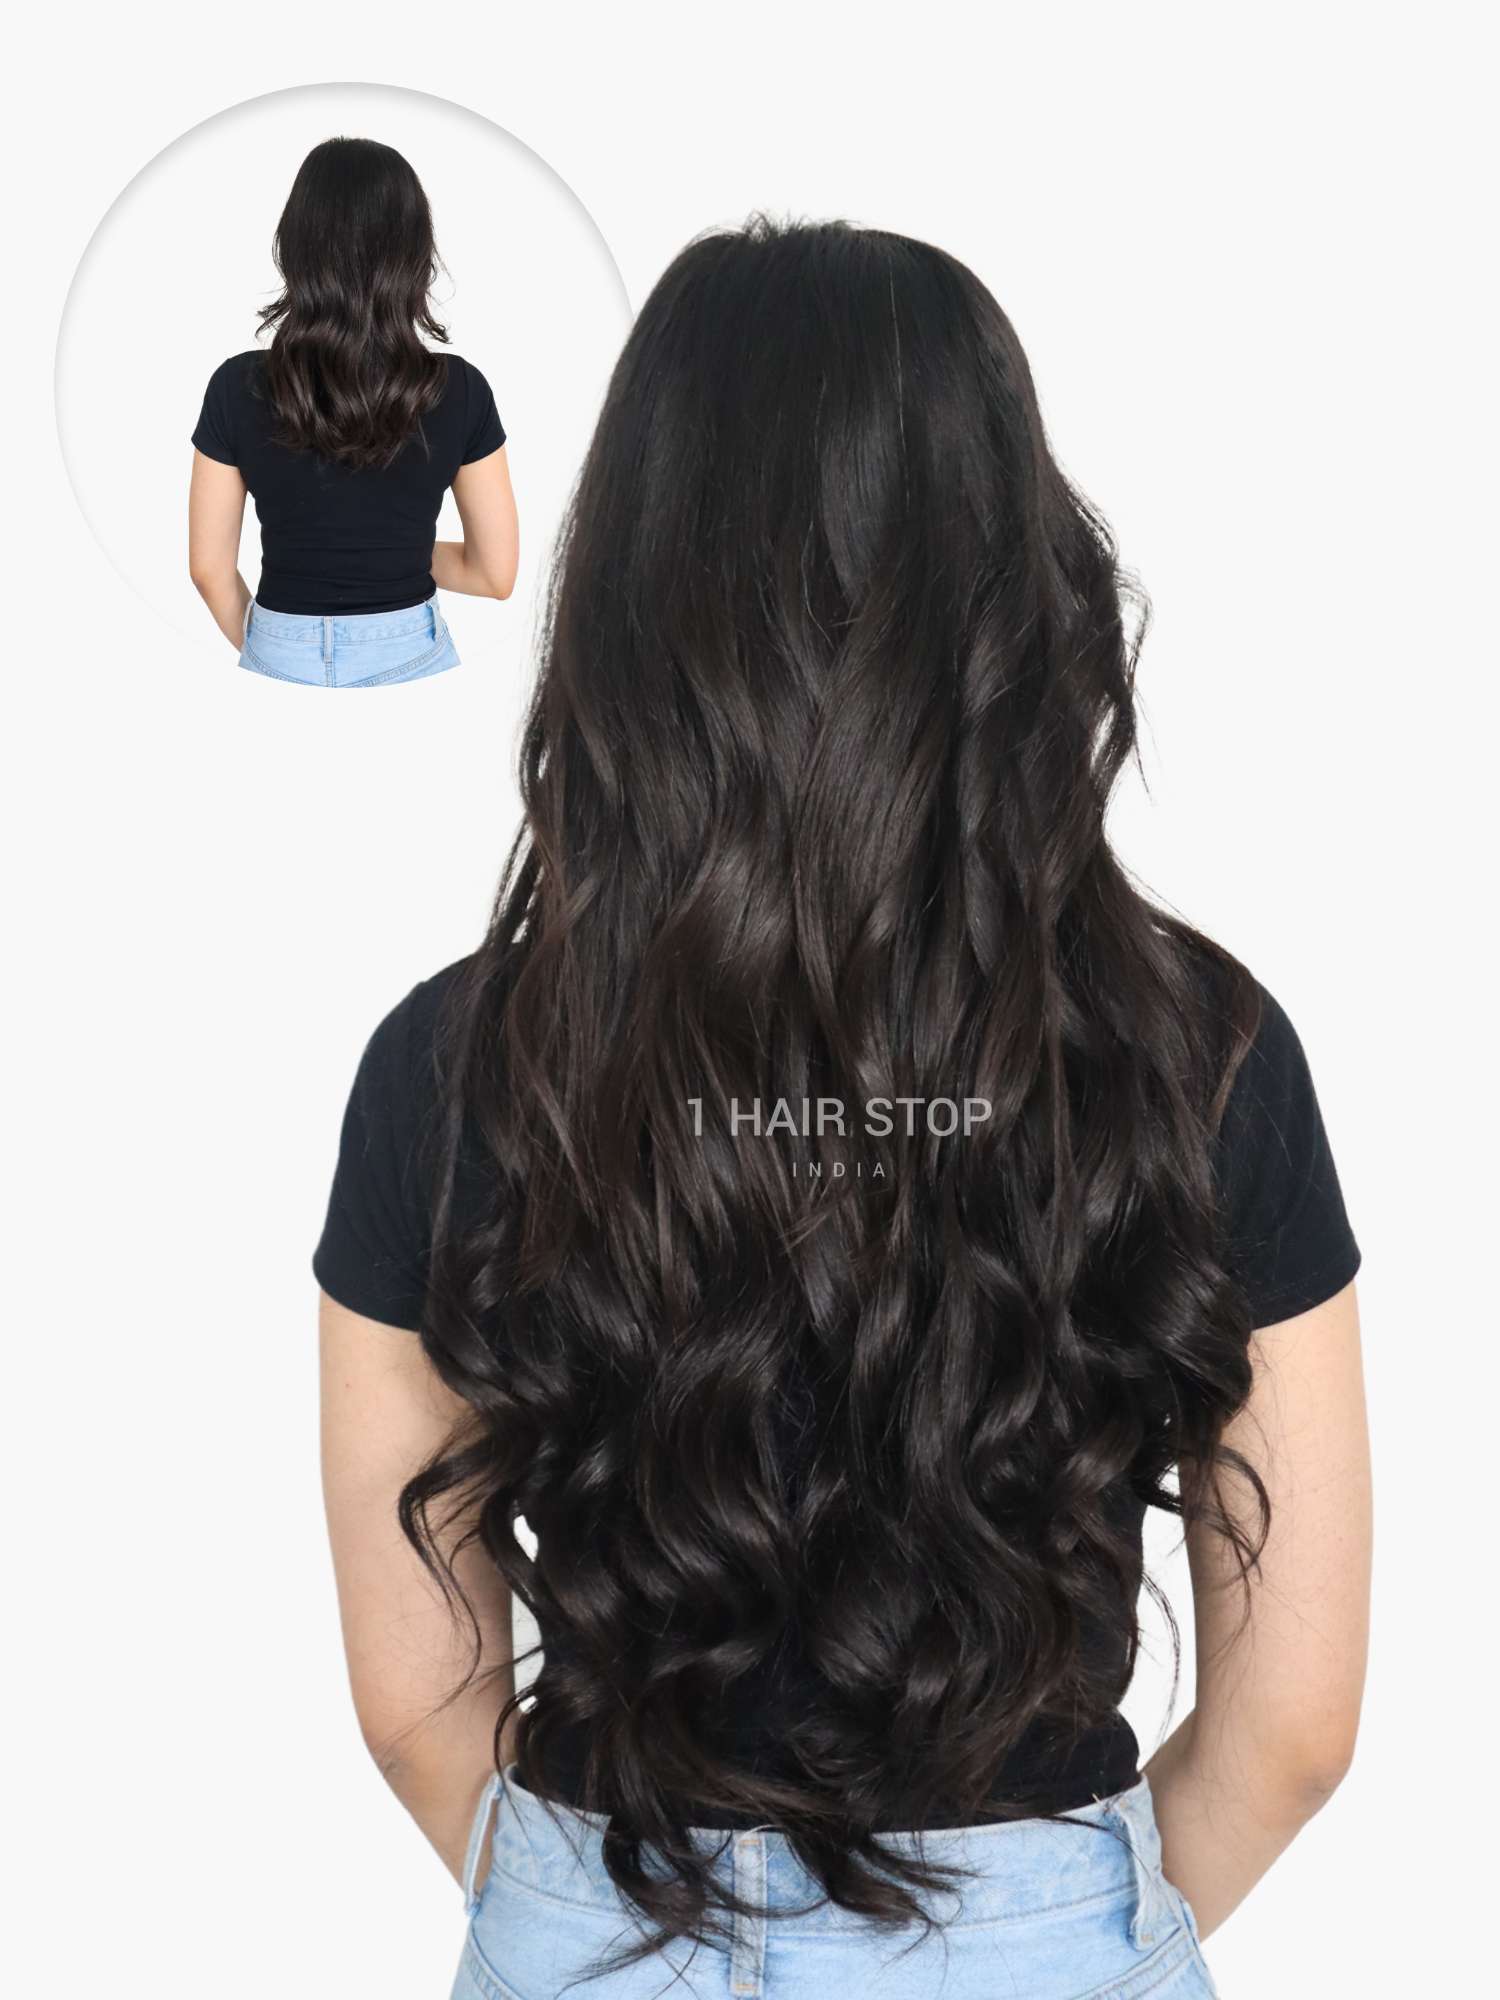 18 Wavy Hair Extension 8 Piece Kit by Hairdo